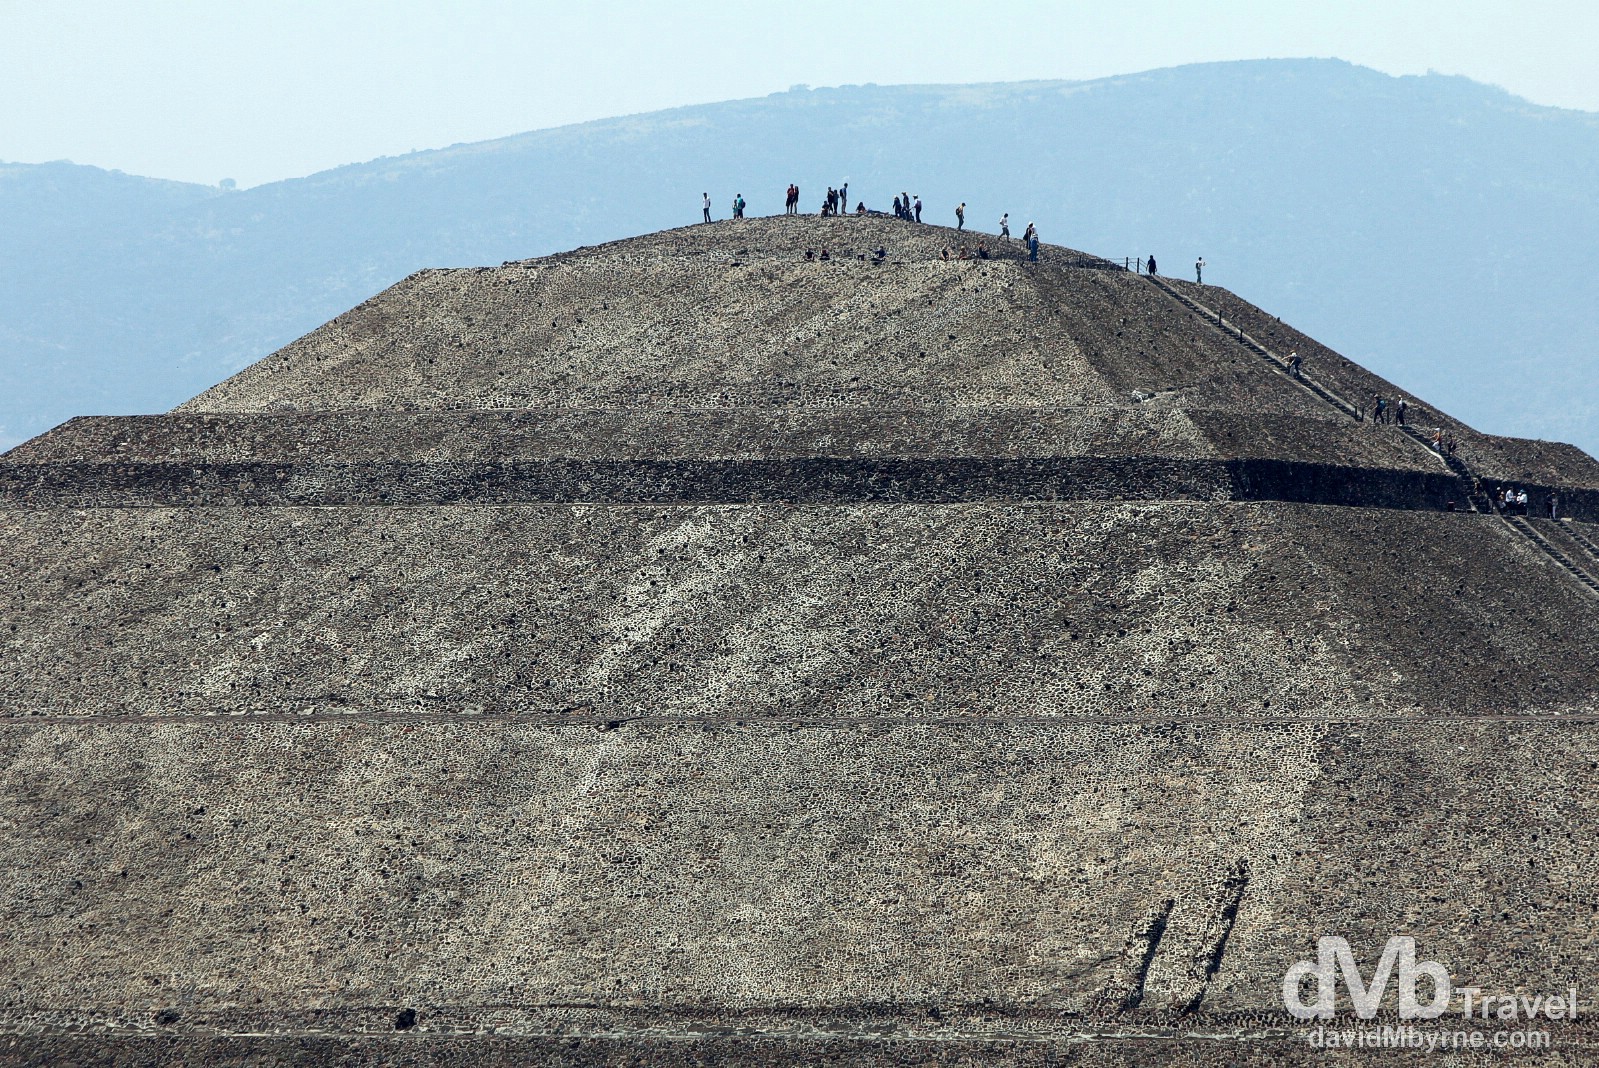 People atop the Piramide del Sol (Pyramid of the Sun) as seen from the slightly smaller Piramide de la Luna (Pyramid of the Moon), Teotihuacan, Mexico. April 29th 2013.